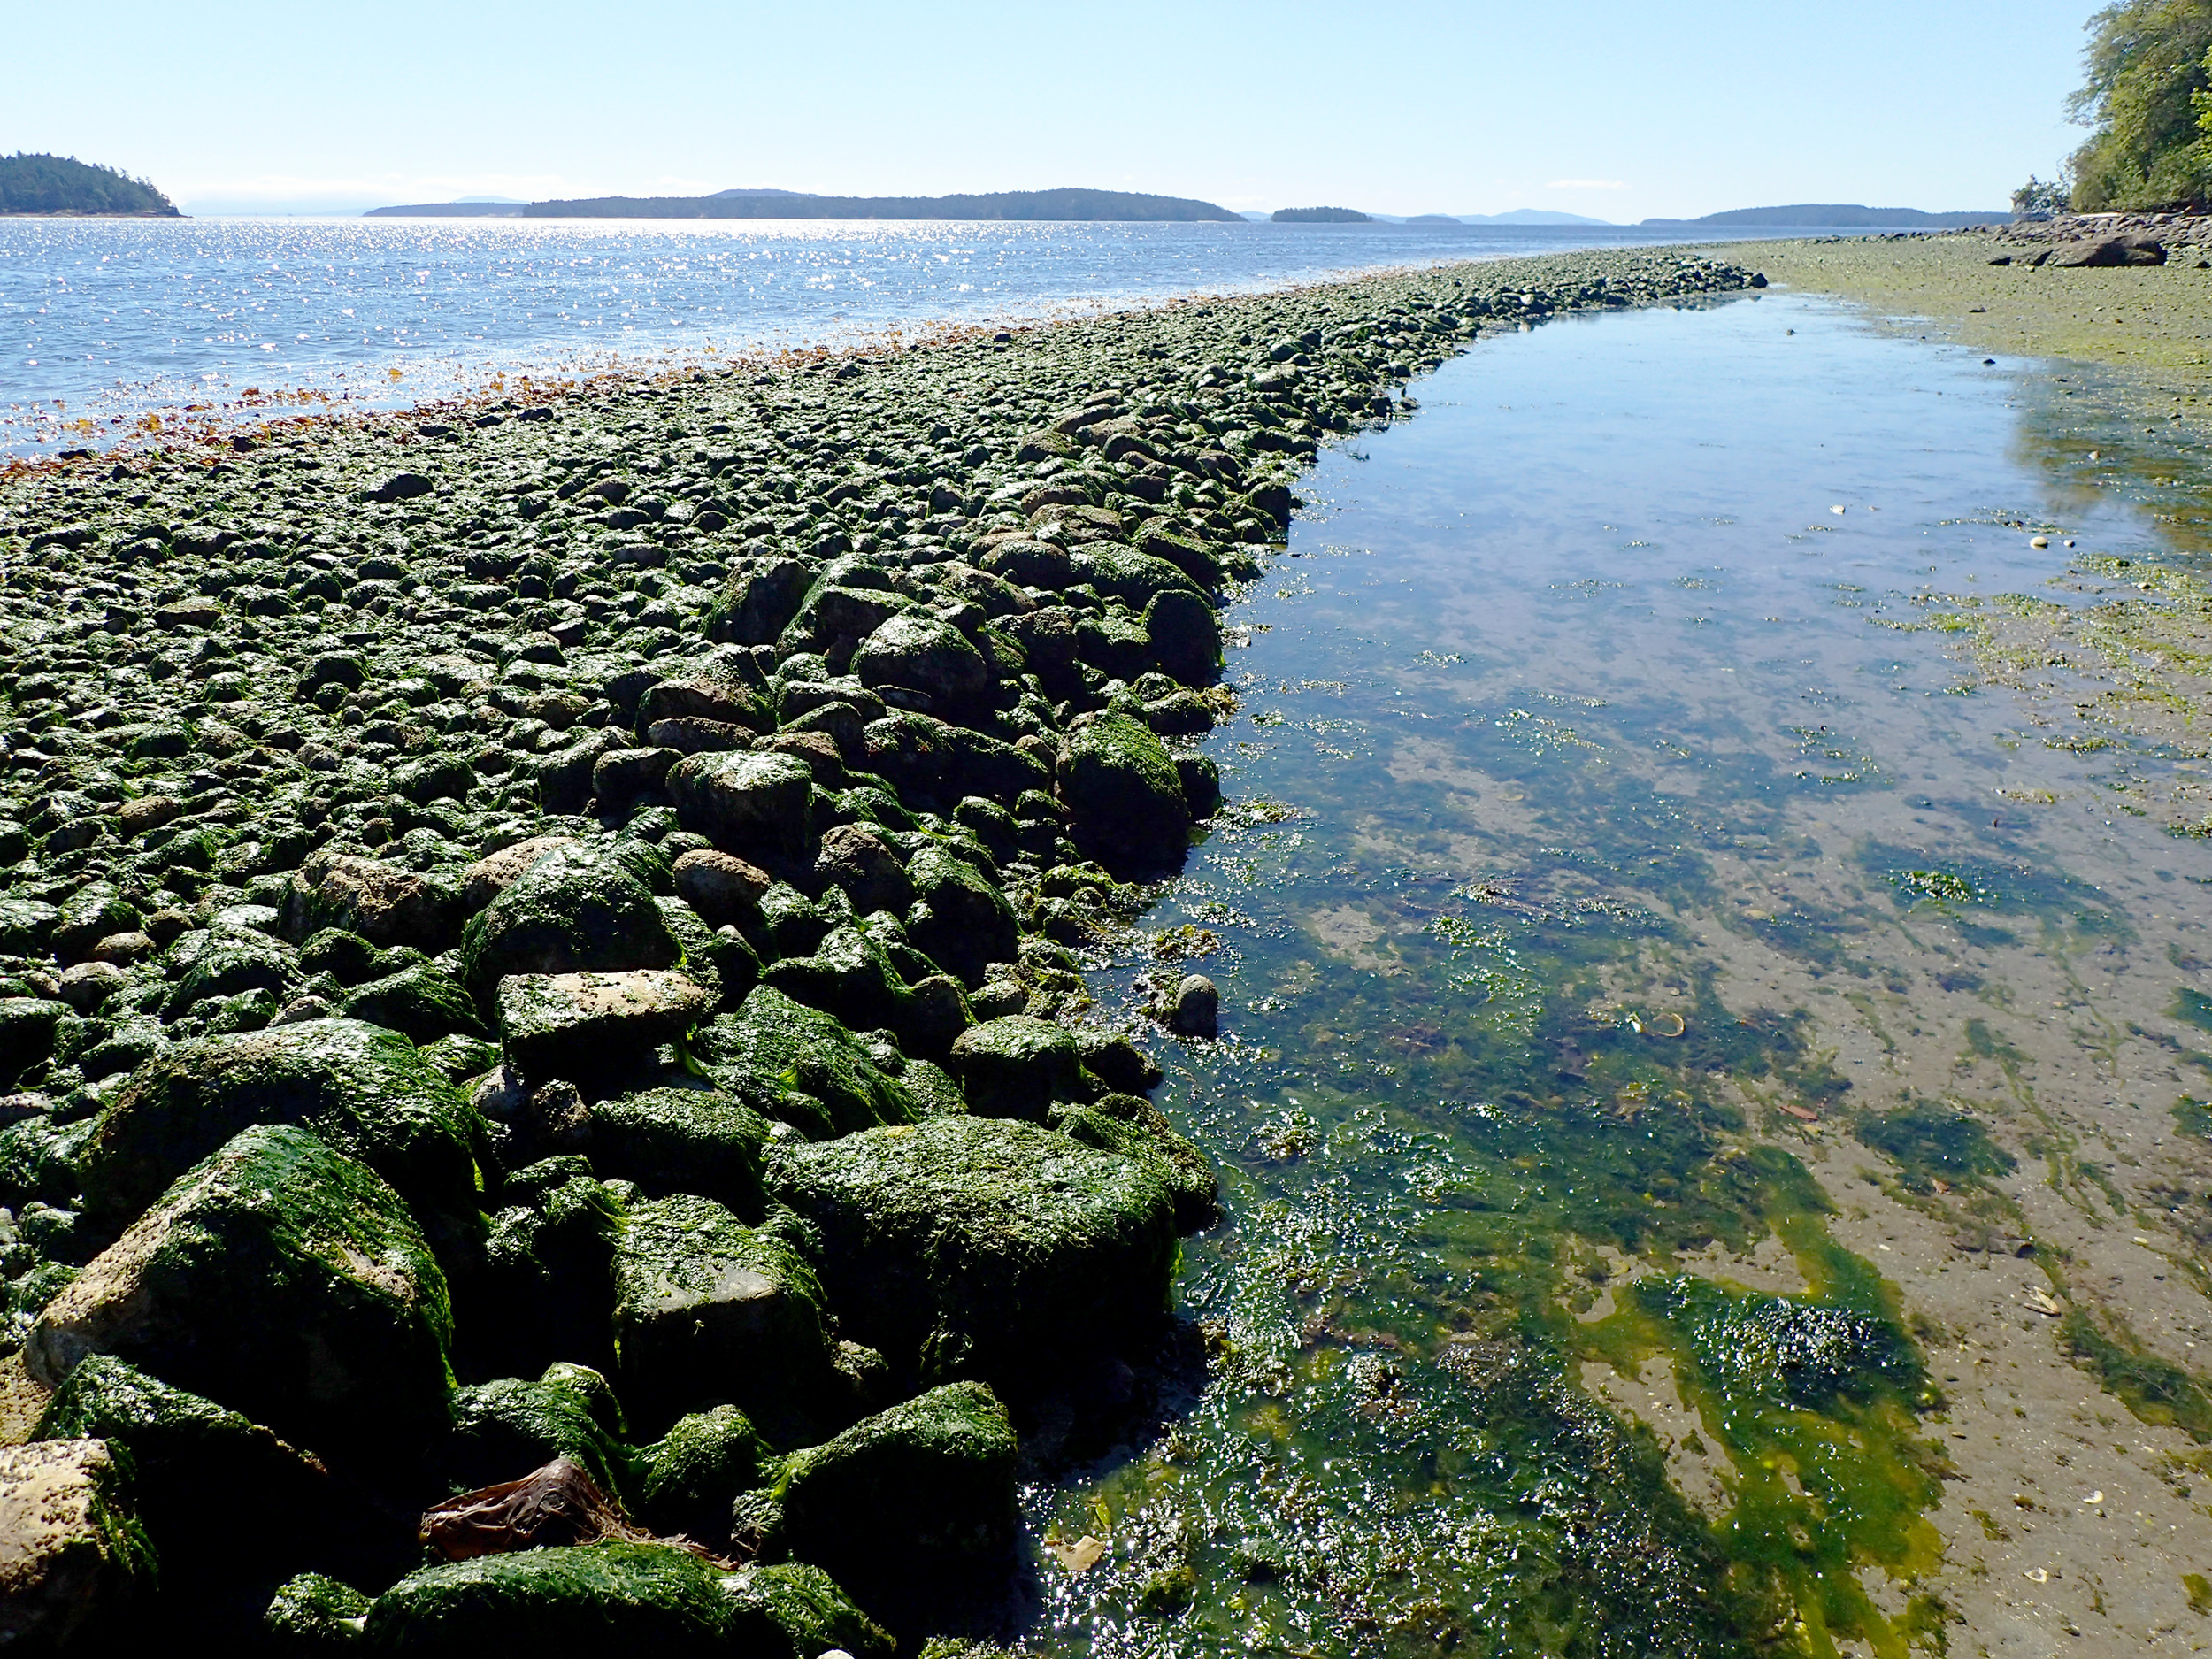  The Fulford Harbor clam garden is a half a mile long and supports a diverse marine community. Photo: Julie Barber 